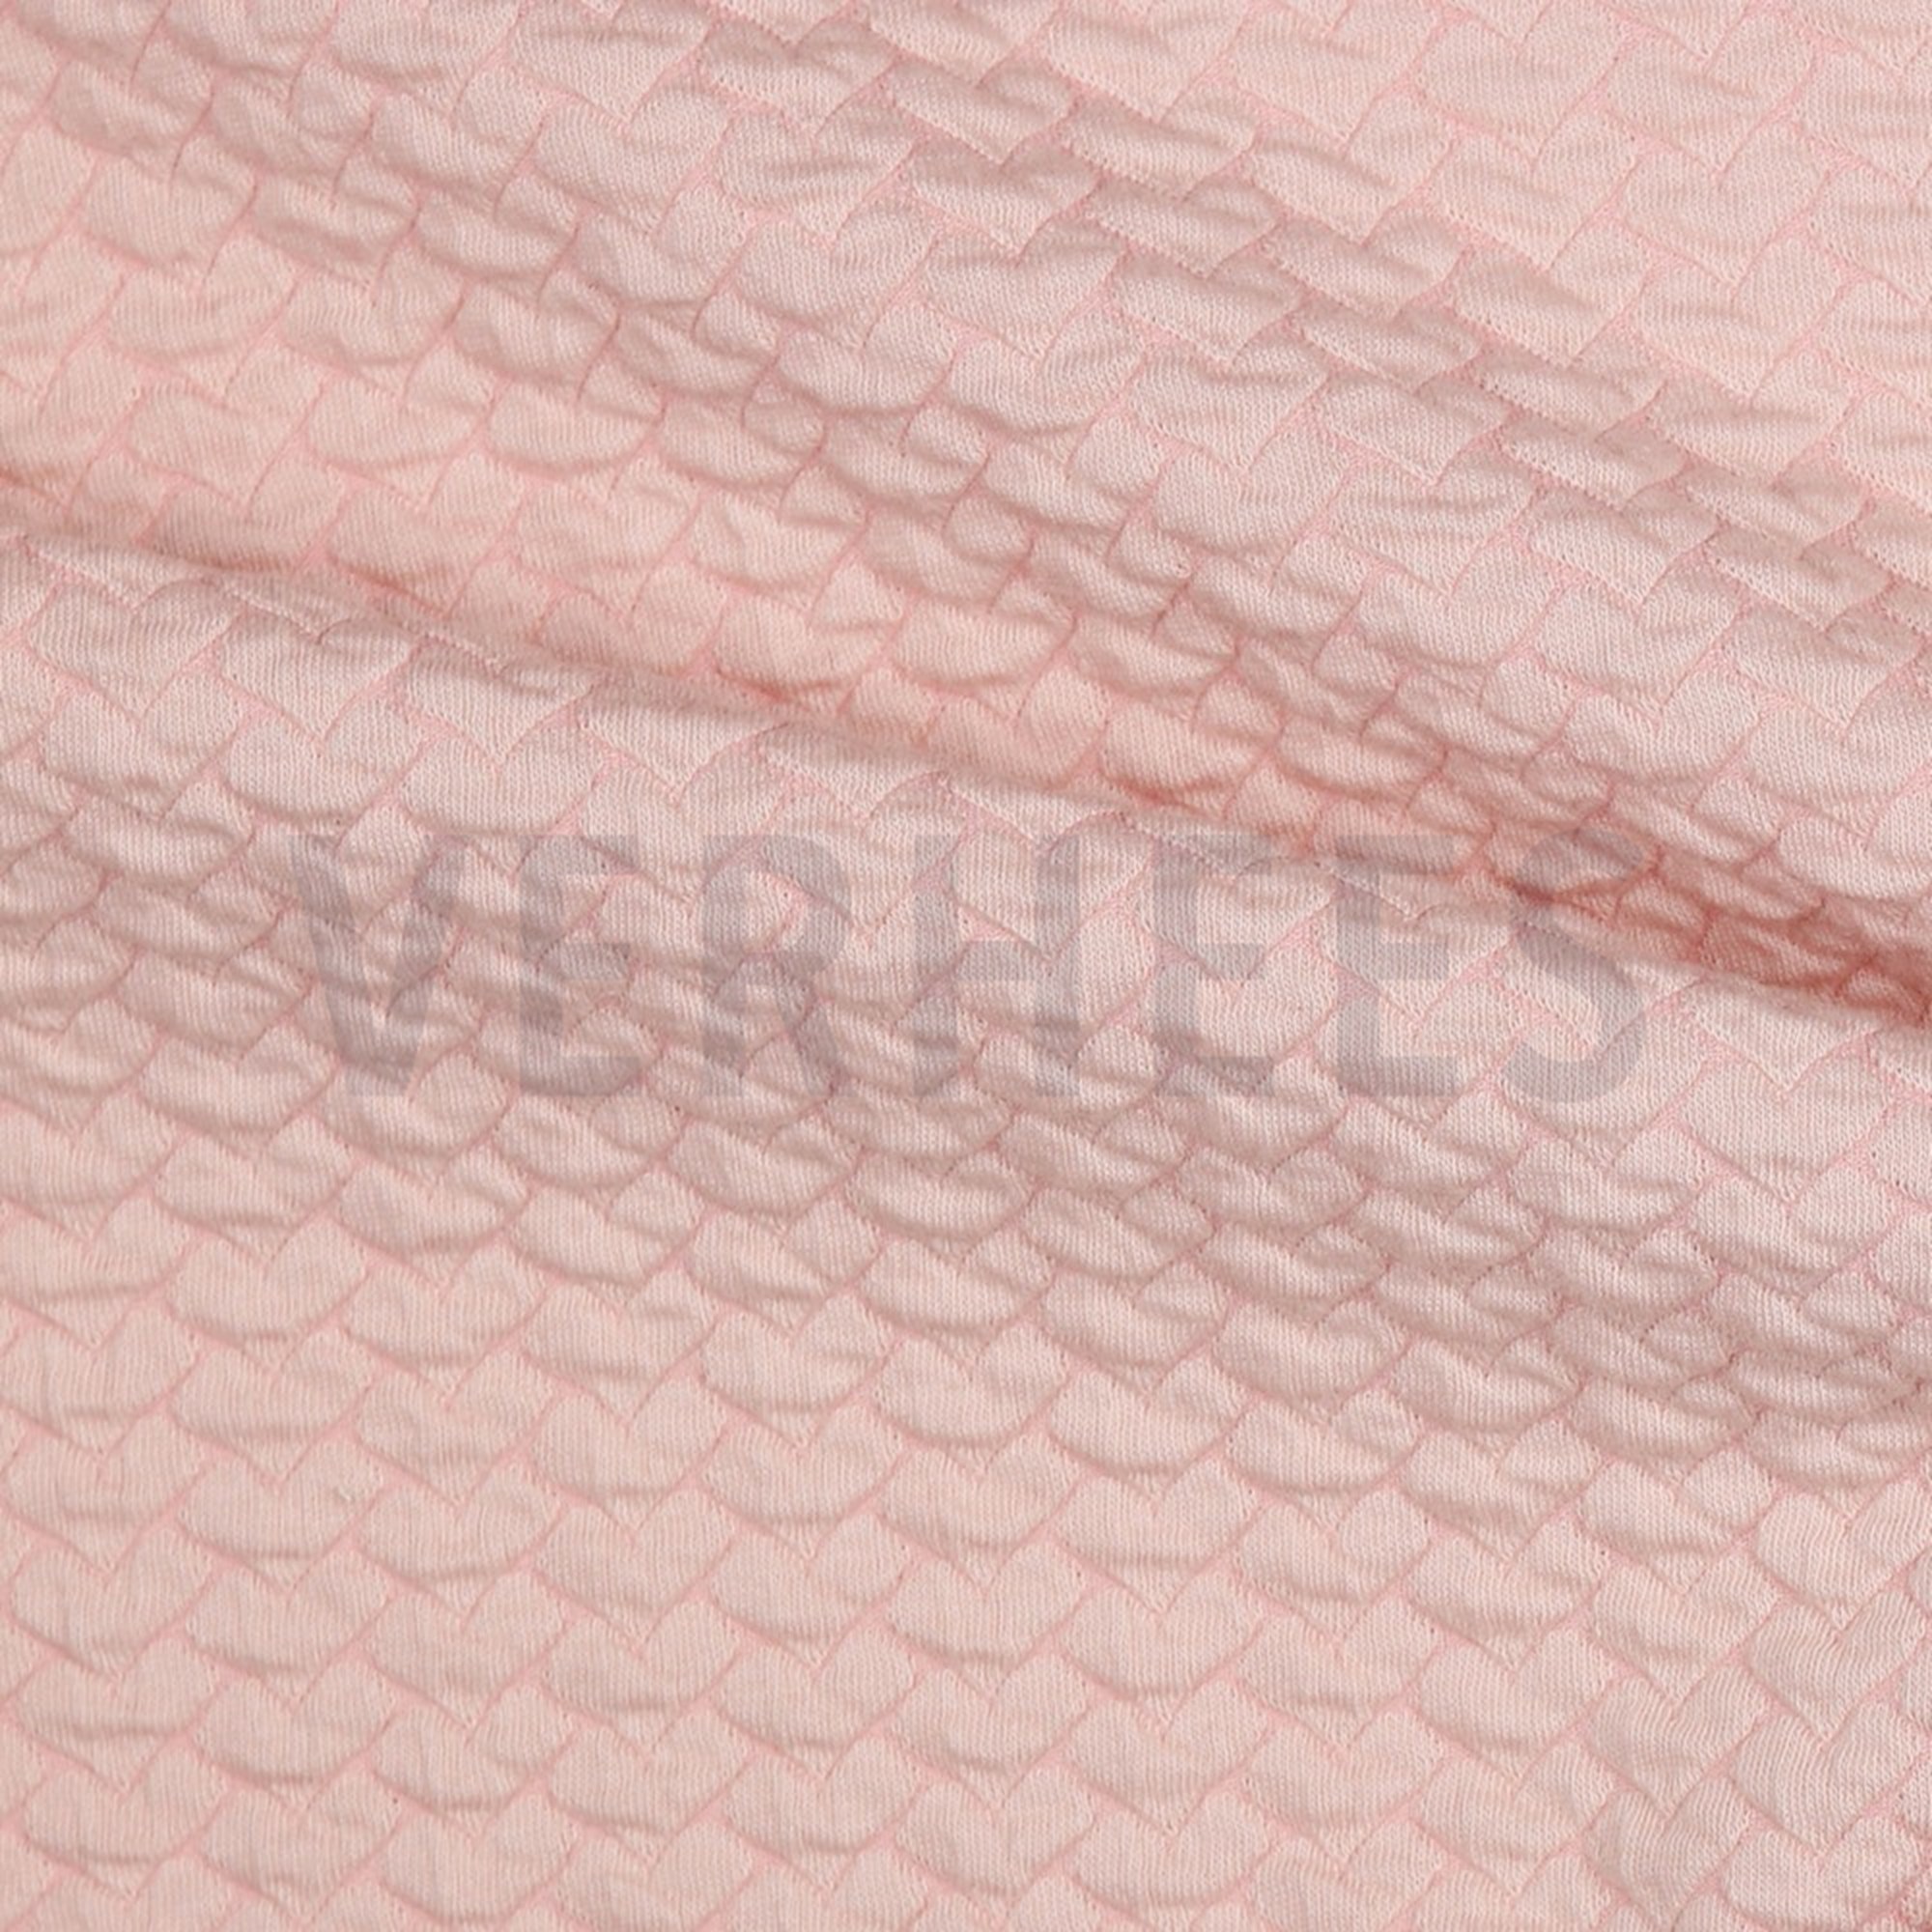 KNITTED JACQUARD ROSE (high resolution) #3